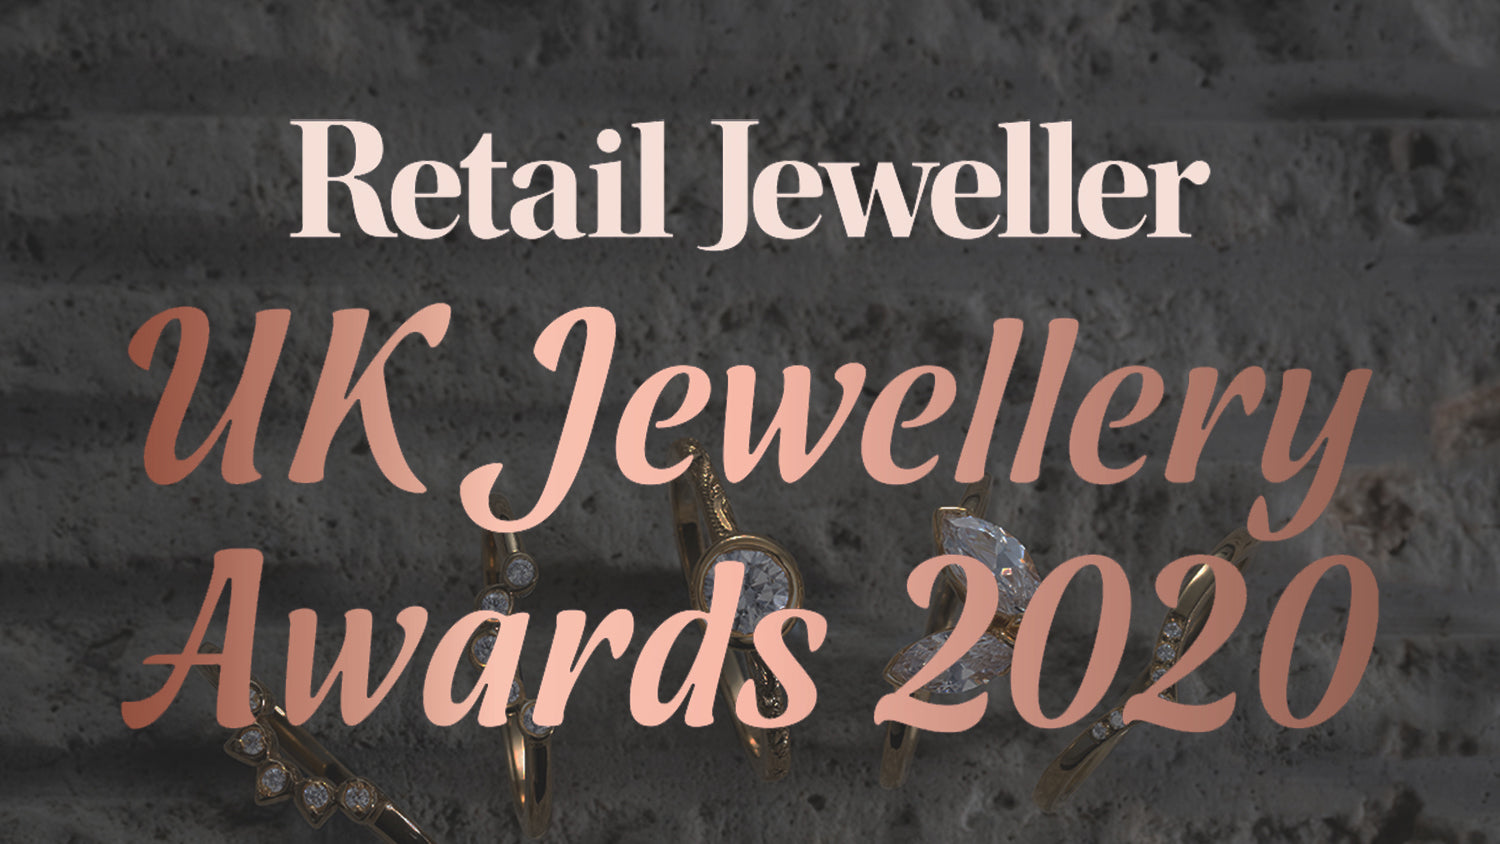 Lebrusan Studio is shortlisted for two UK Jewellery Awards